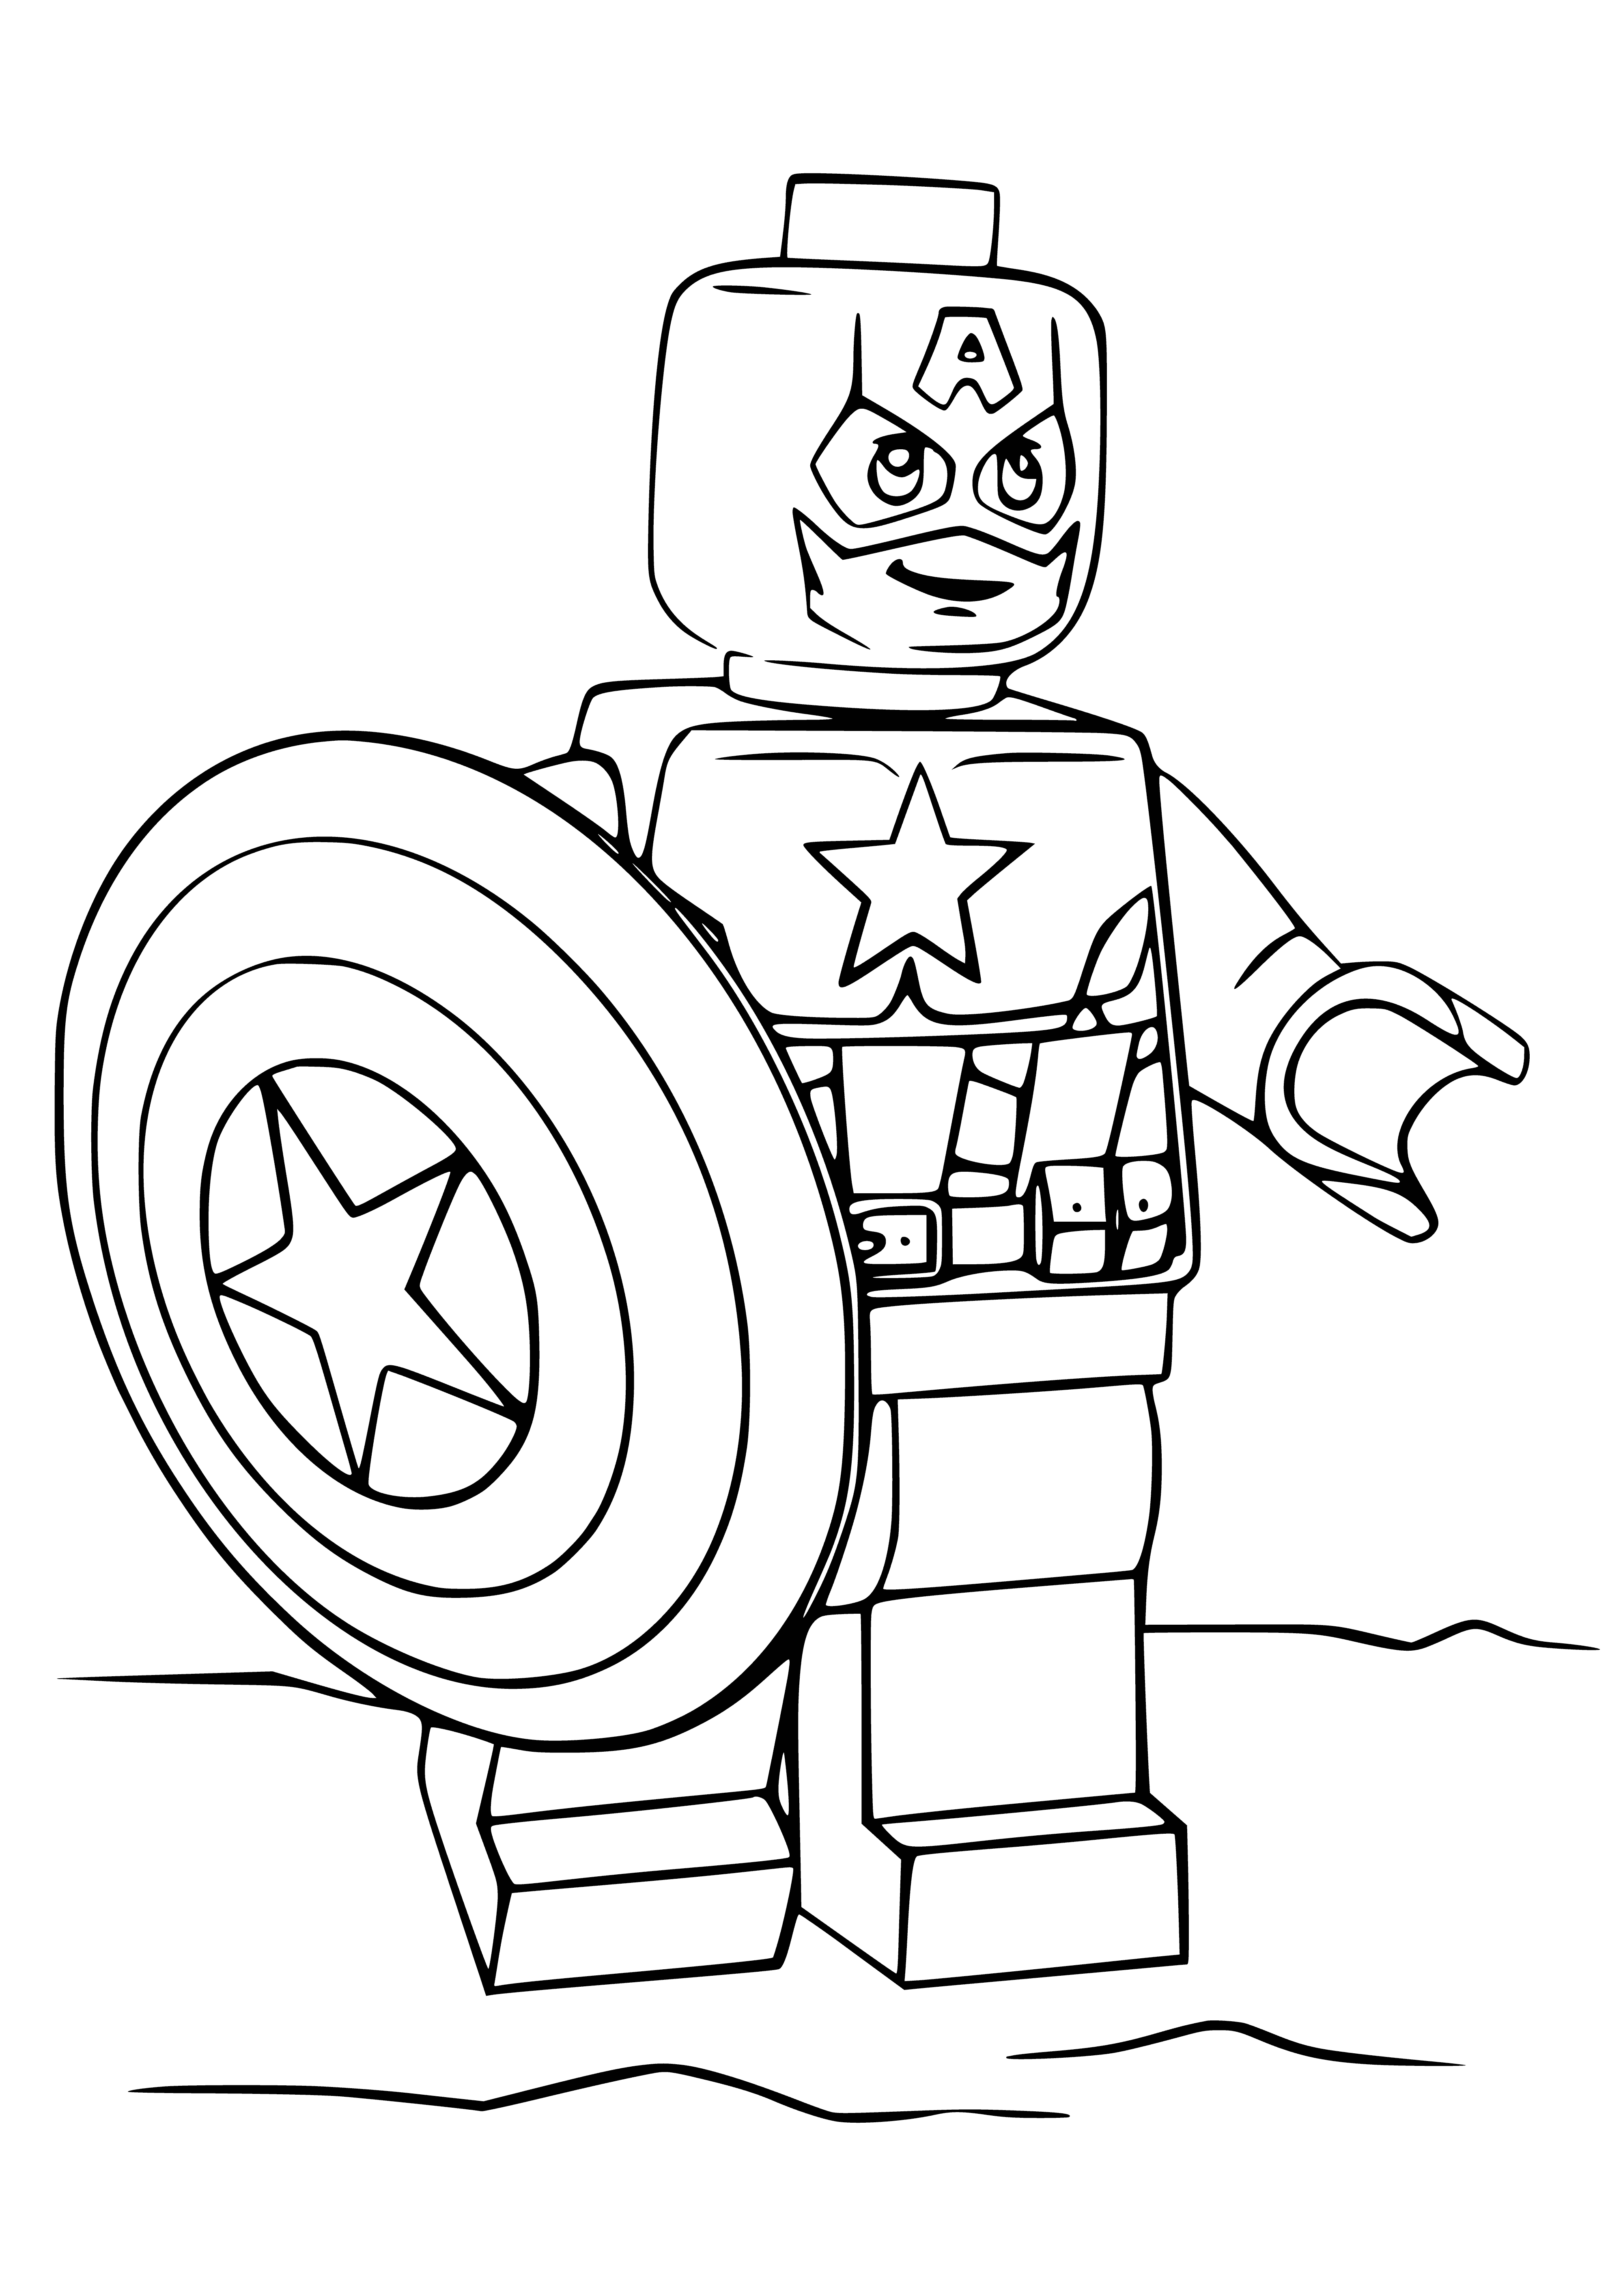 coloring page: Captain America fights for American ideals & justice, often seen carrying his shield to deflect enemy attacks. #MarvelComics